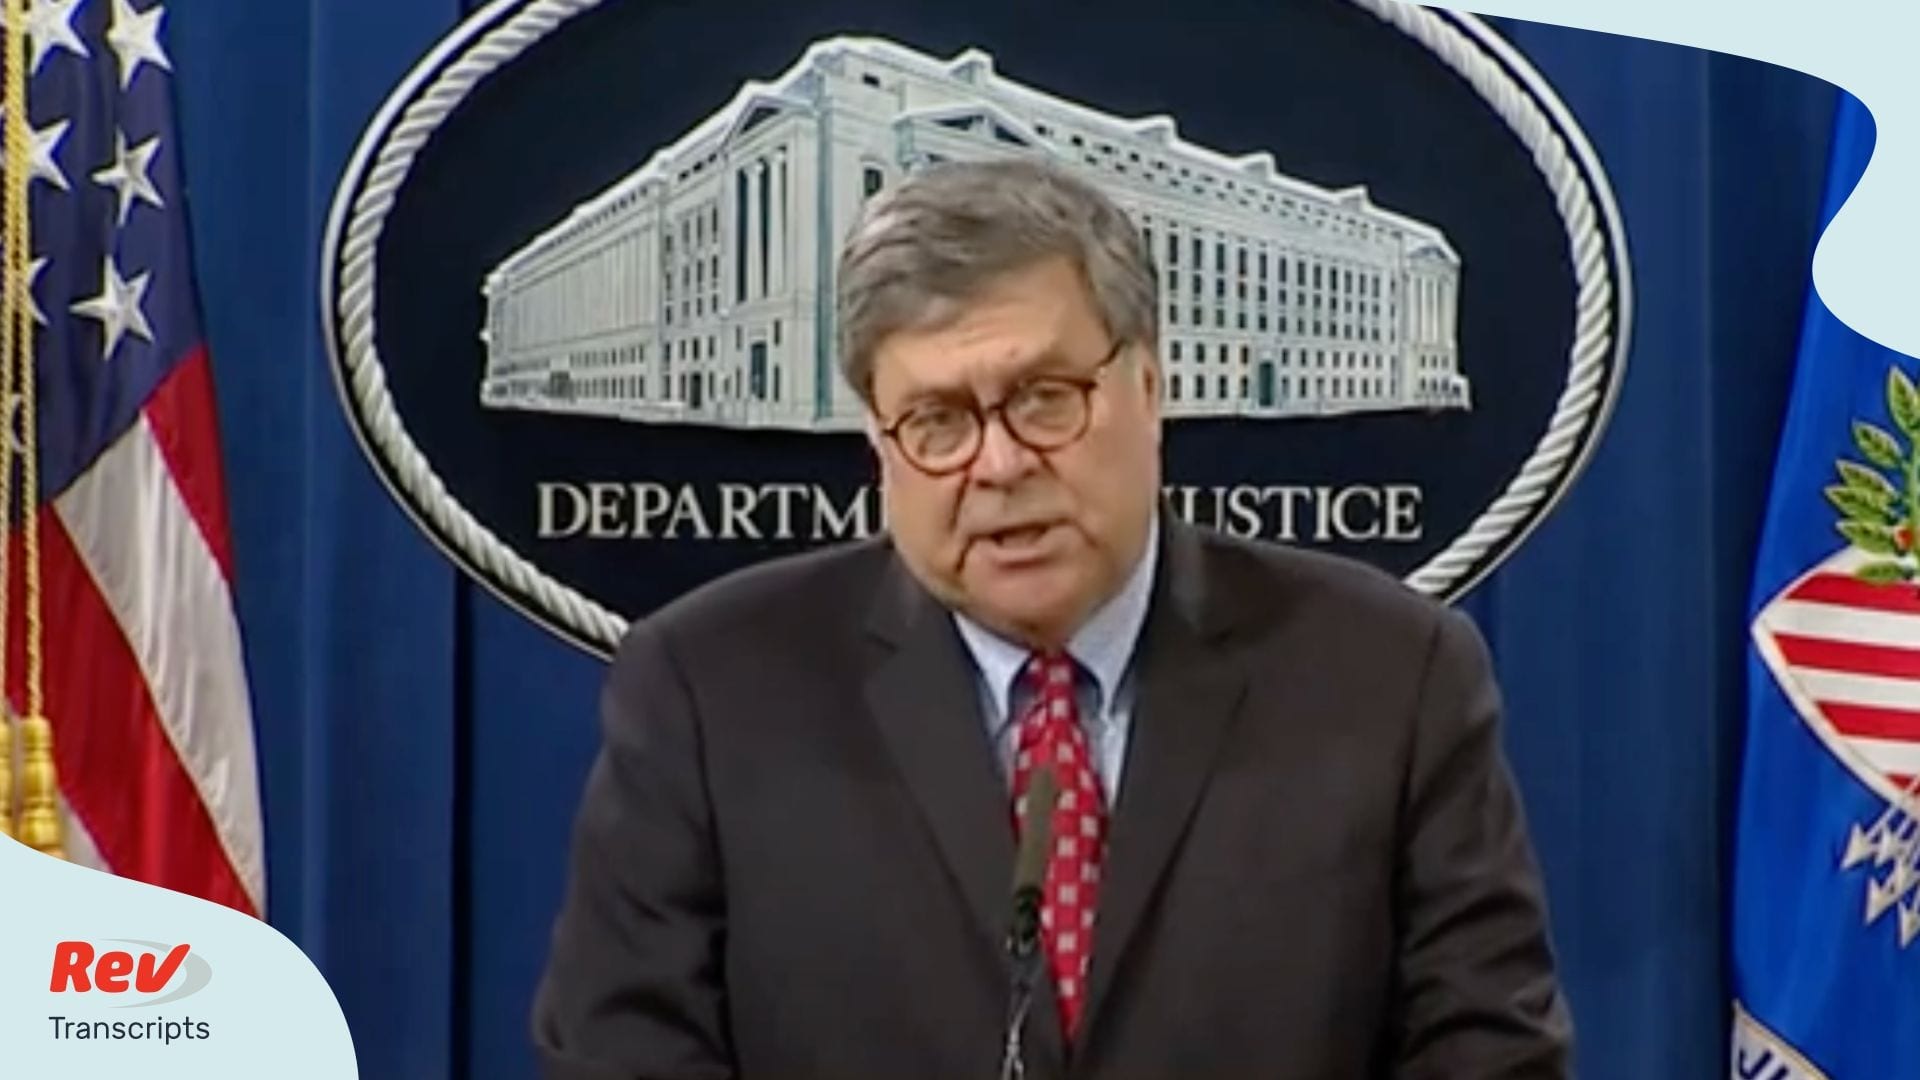 William Barr Speech on George Floyd Protests, Radical Groups